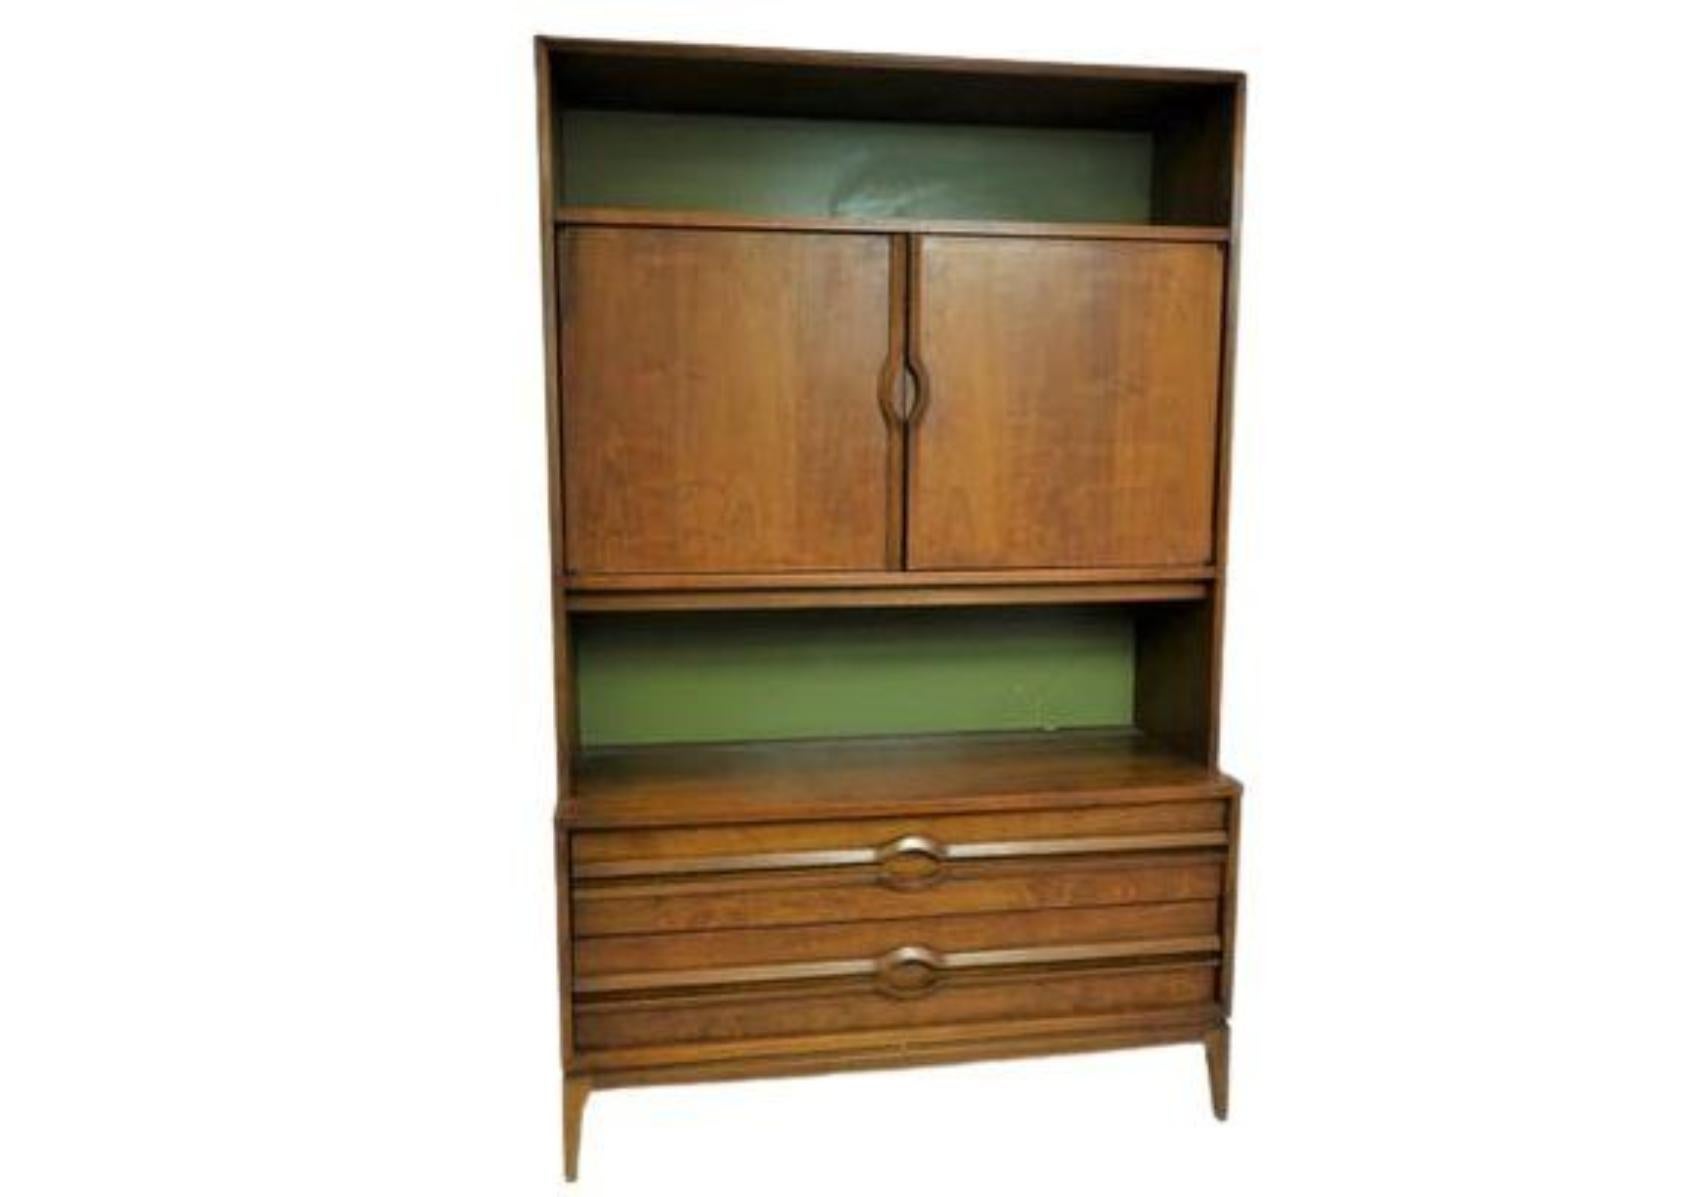 Beautiful Mid-Century Cabinet With Drawers and Forest Green Accents. All The Touch-Ups Will Be Done Before Shipping Or Delivery. See condition above. Dimensions: 44